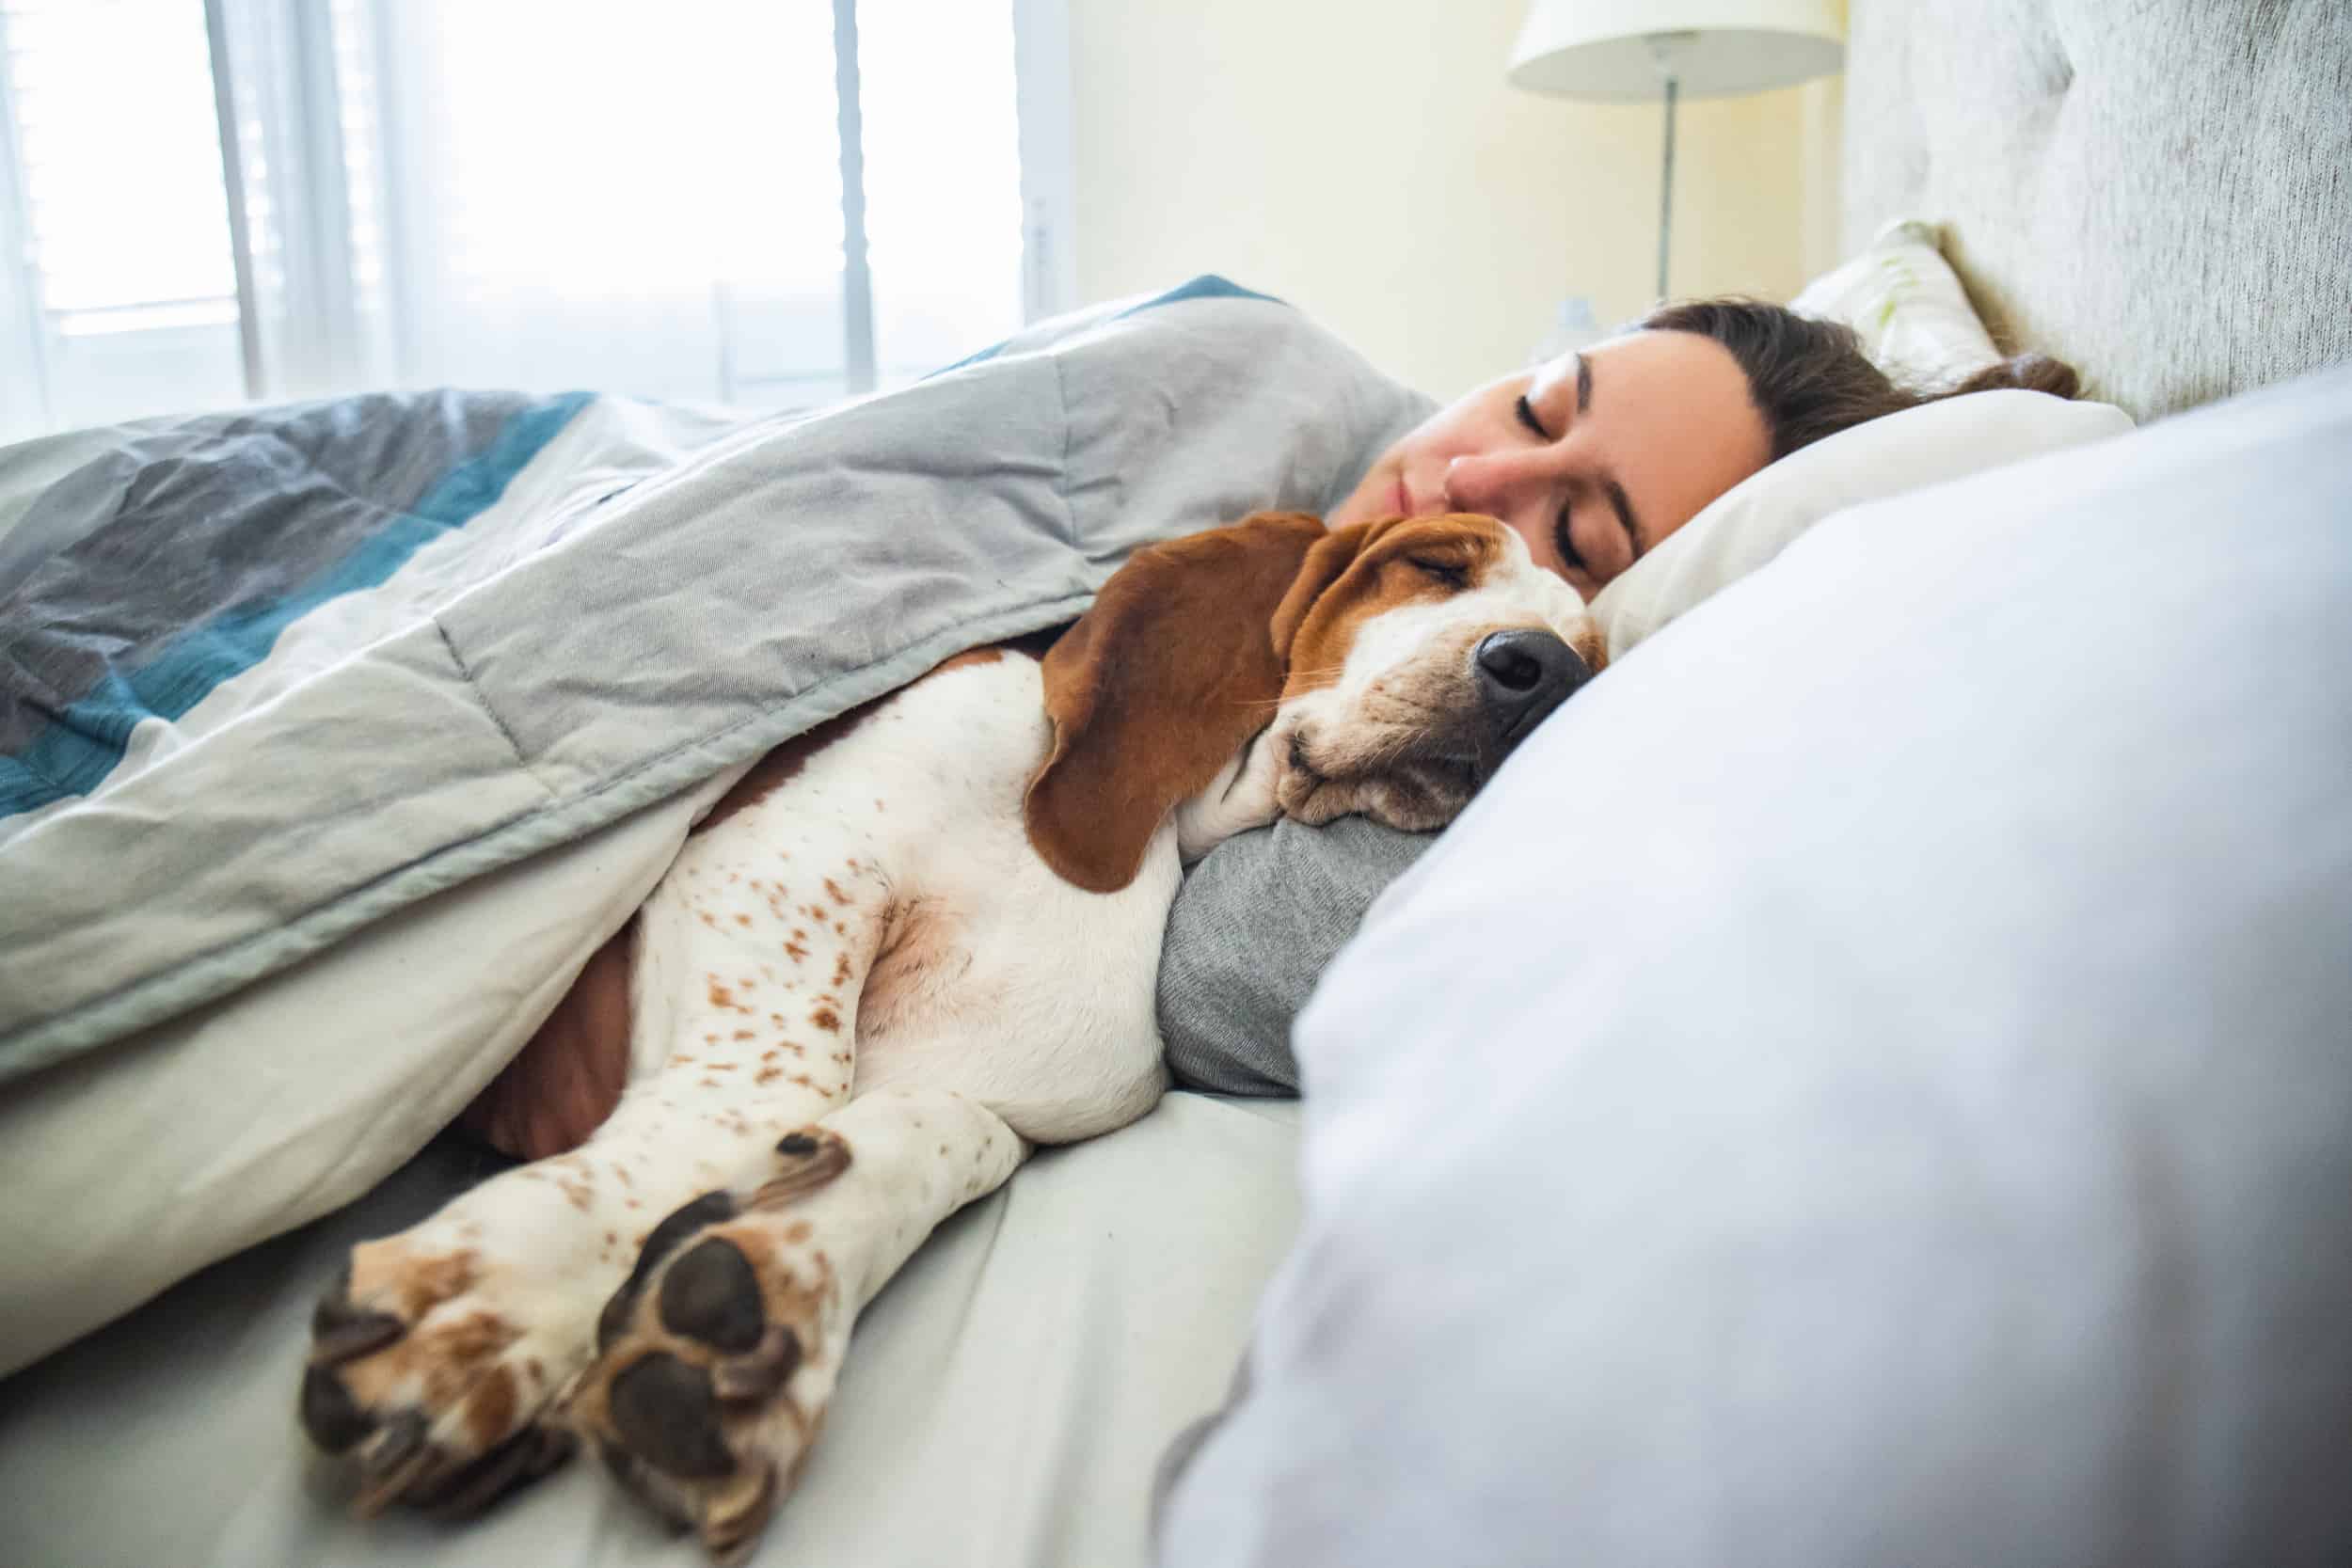 Dog-Joint-Care-Dog-Sleeping-In-Owners-Bed-Min